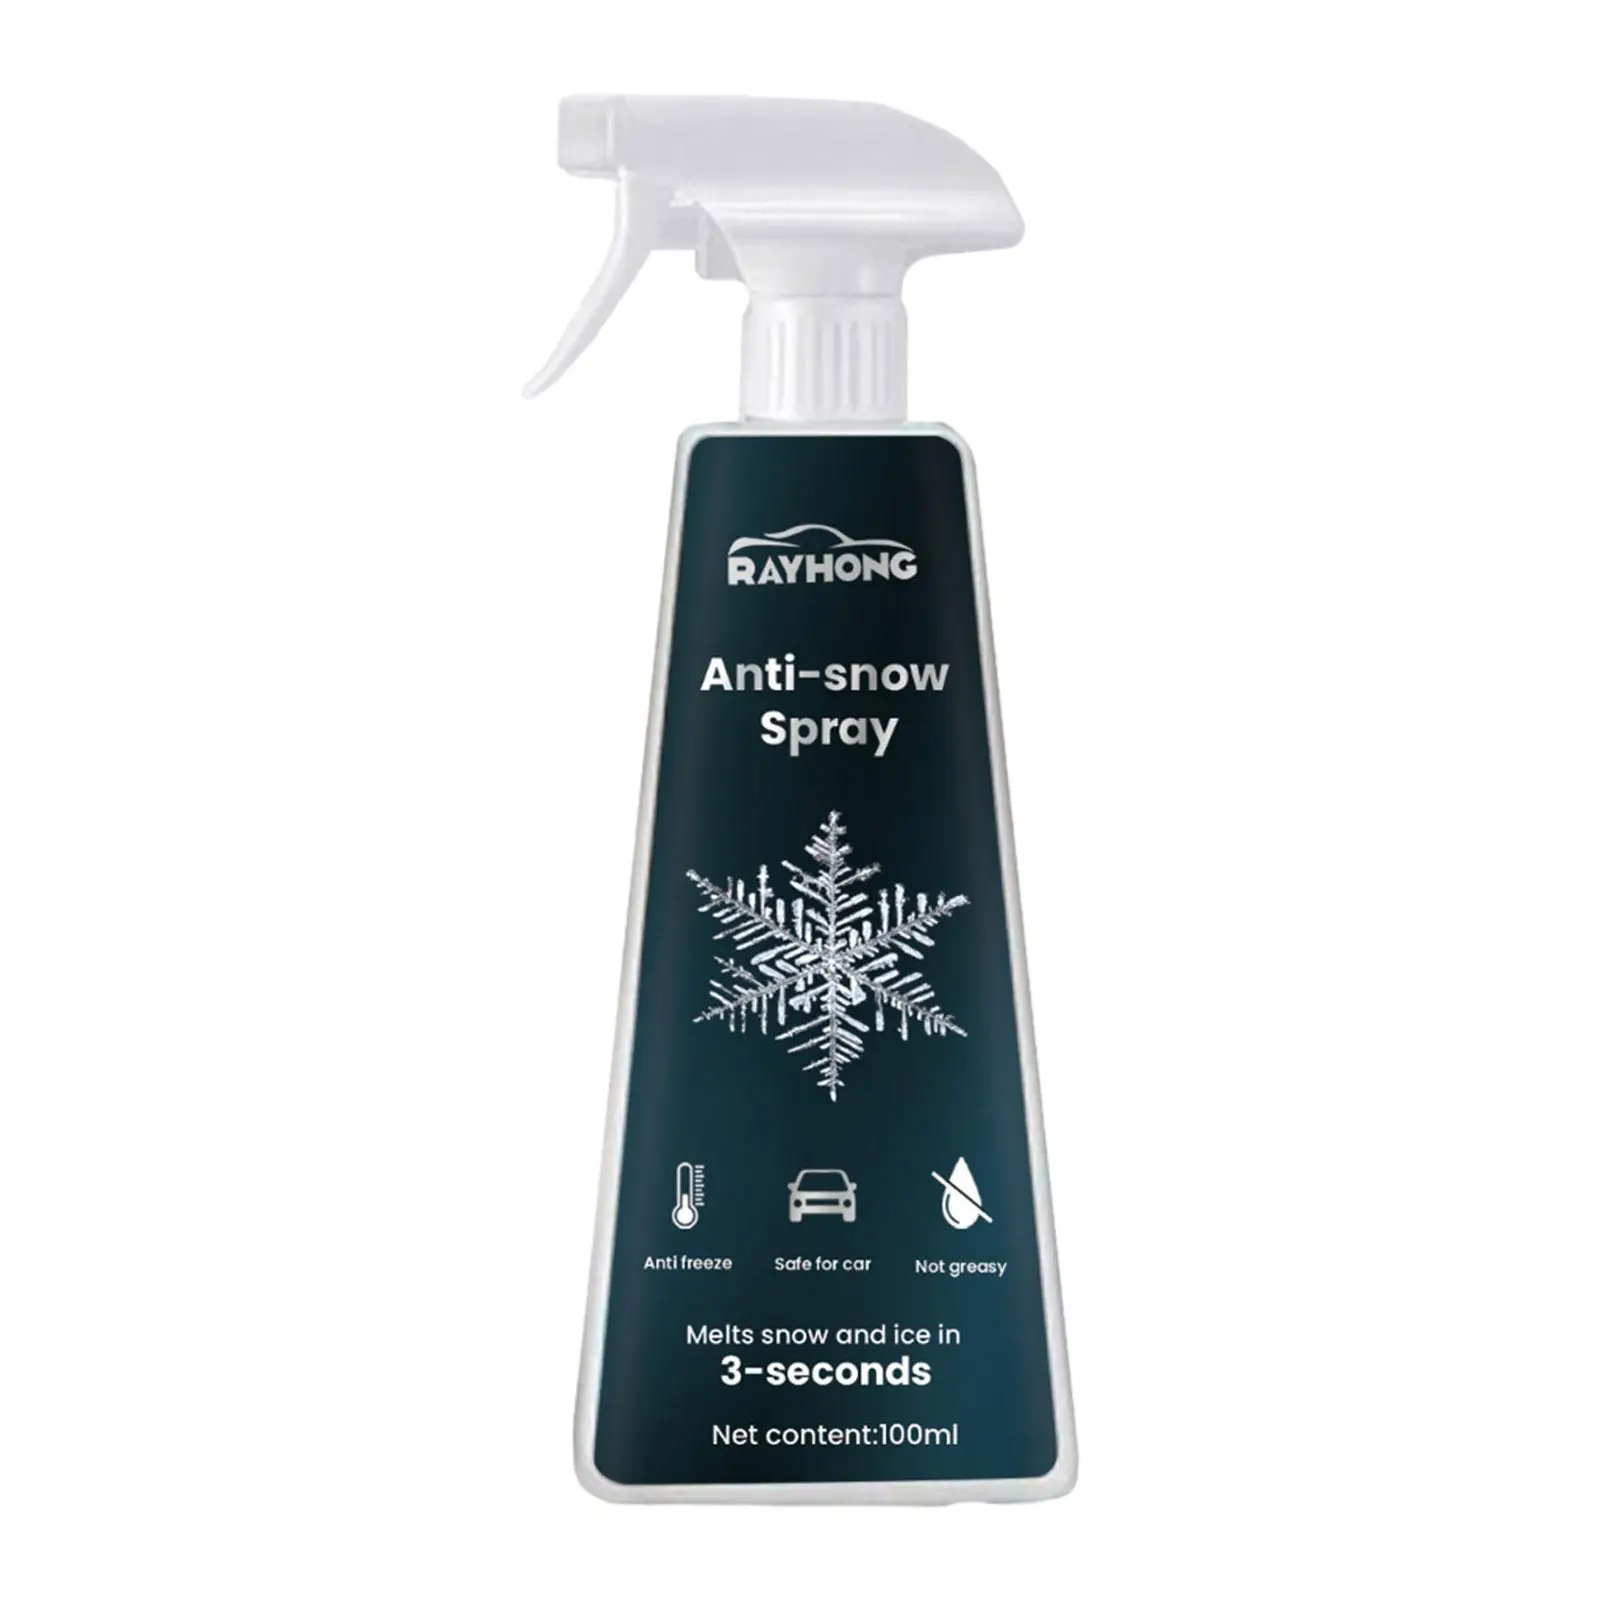 Windshield Spray Agent Windshield Spray Deicer 100ml Defrosting Tool Car Ice Remover Spray Defrosting Liquid for Mirrors